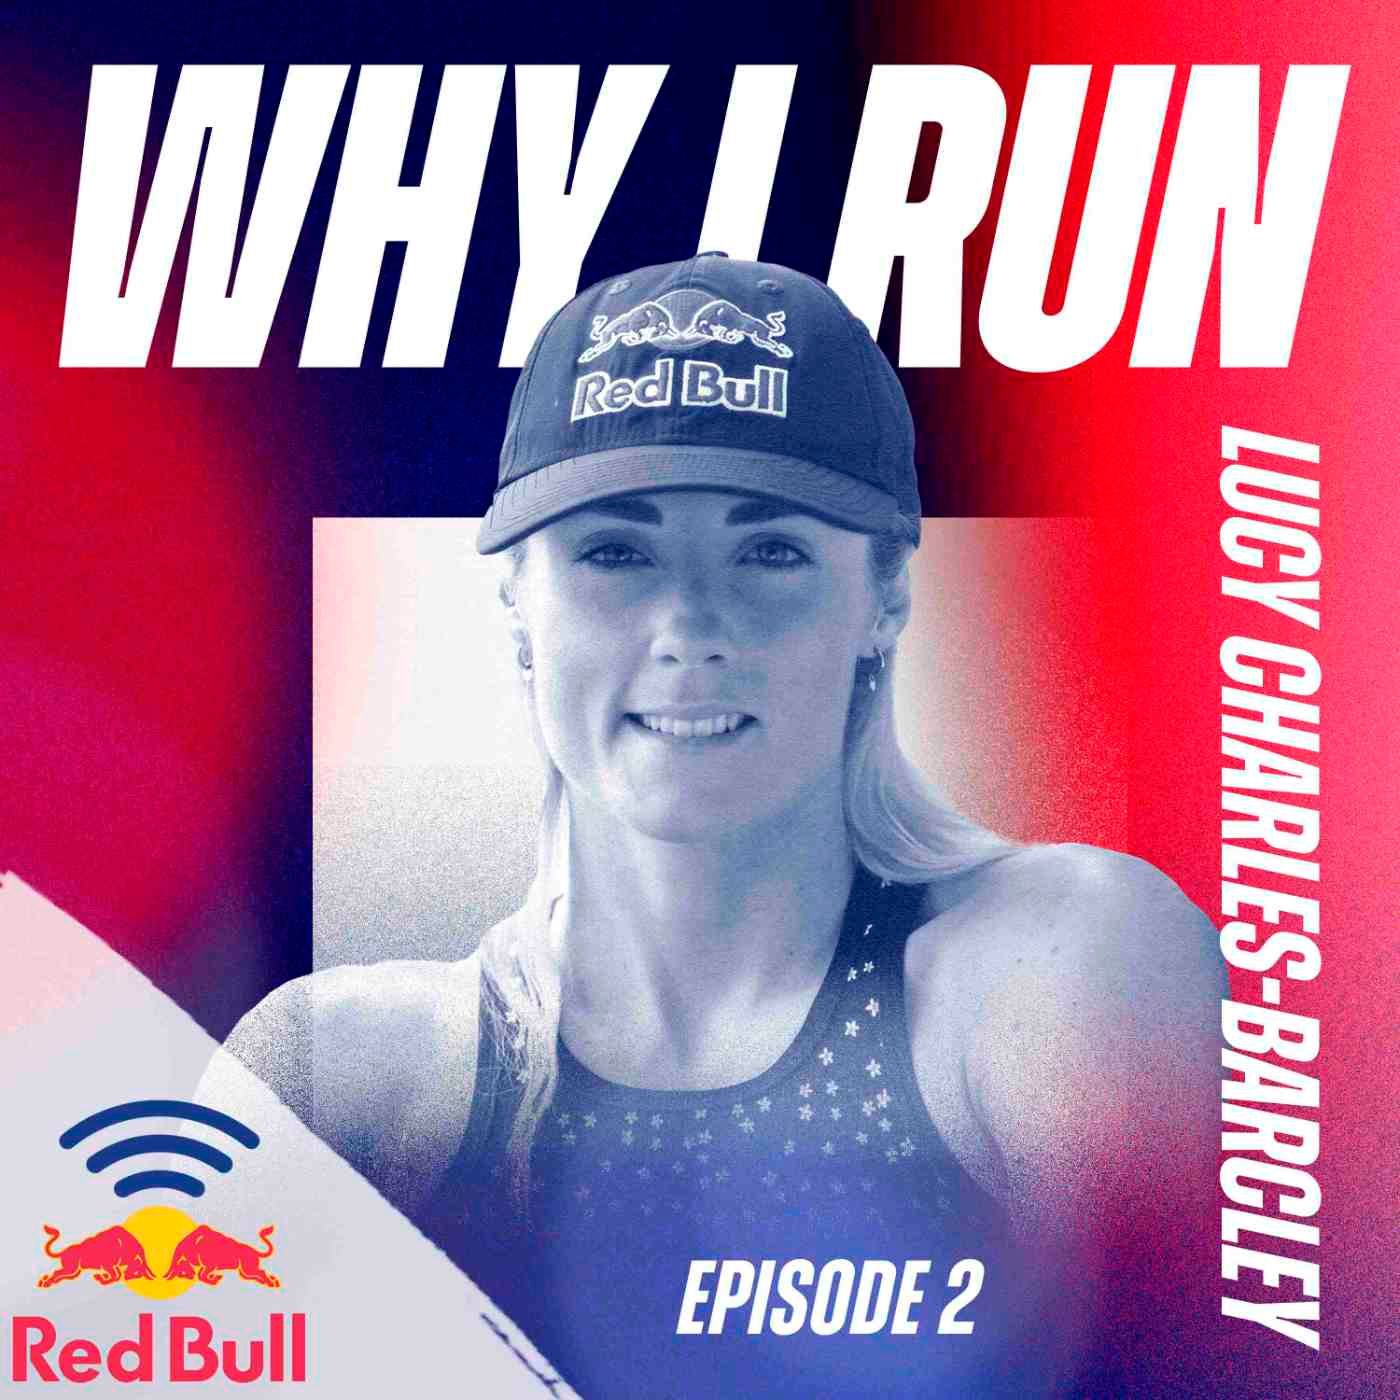 I run for the inner buzz with Ironman triathlete Lucy Charles-Barclay